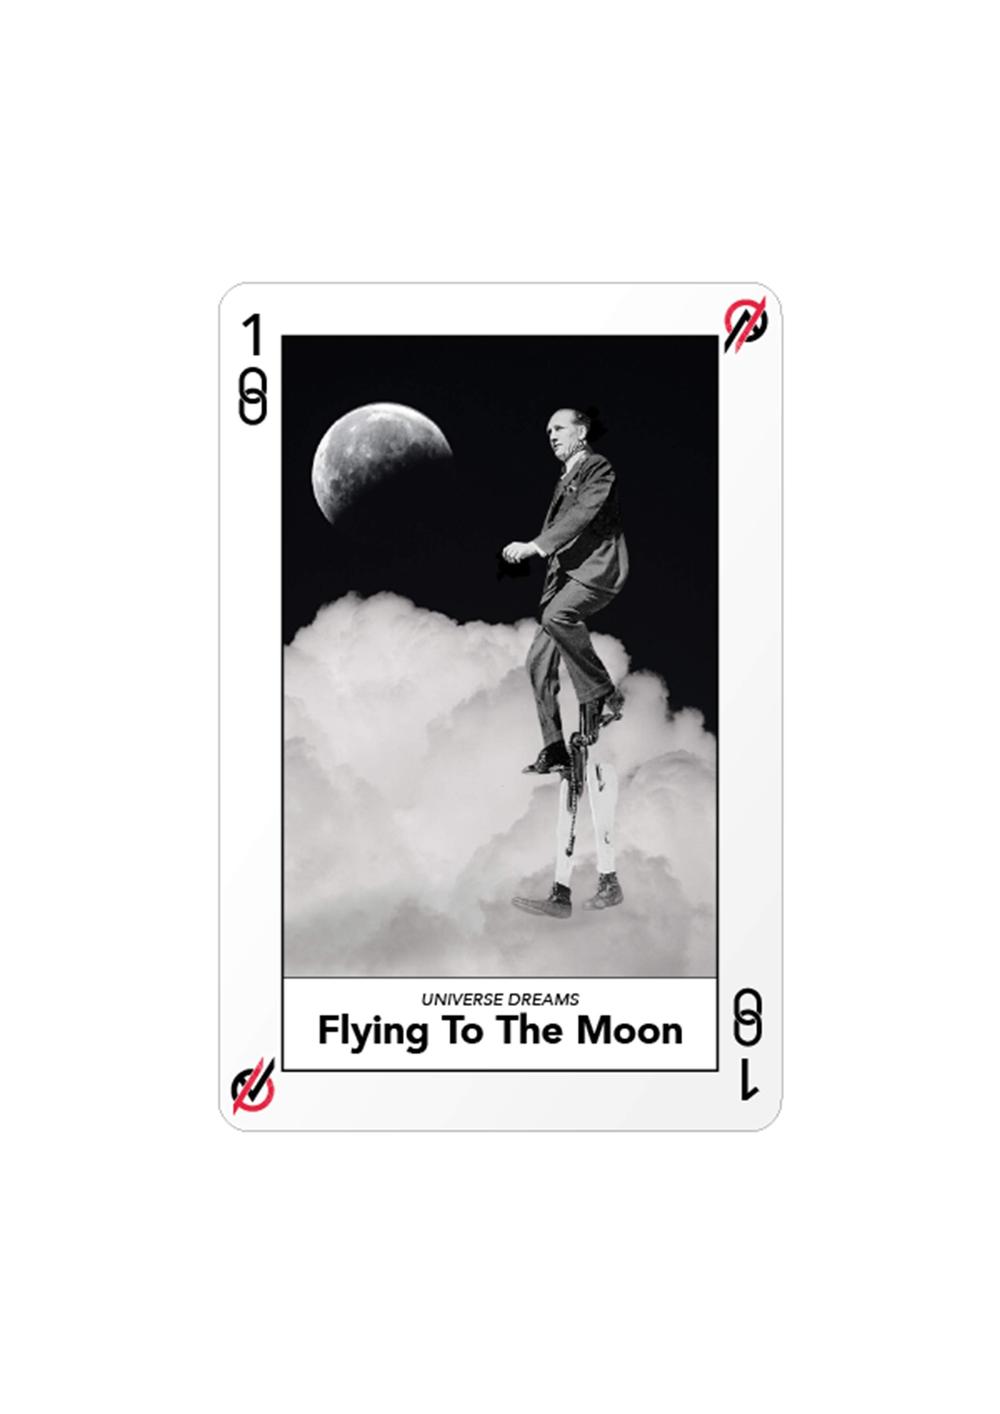 Certificate of Authenticity and Consignment - Flying to the Moon